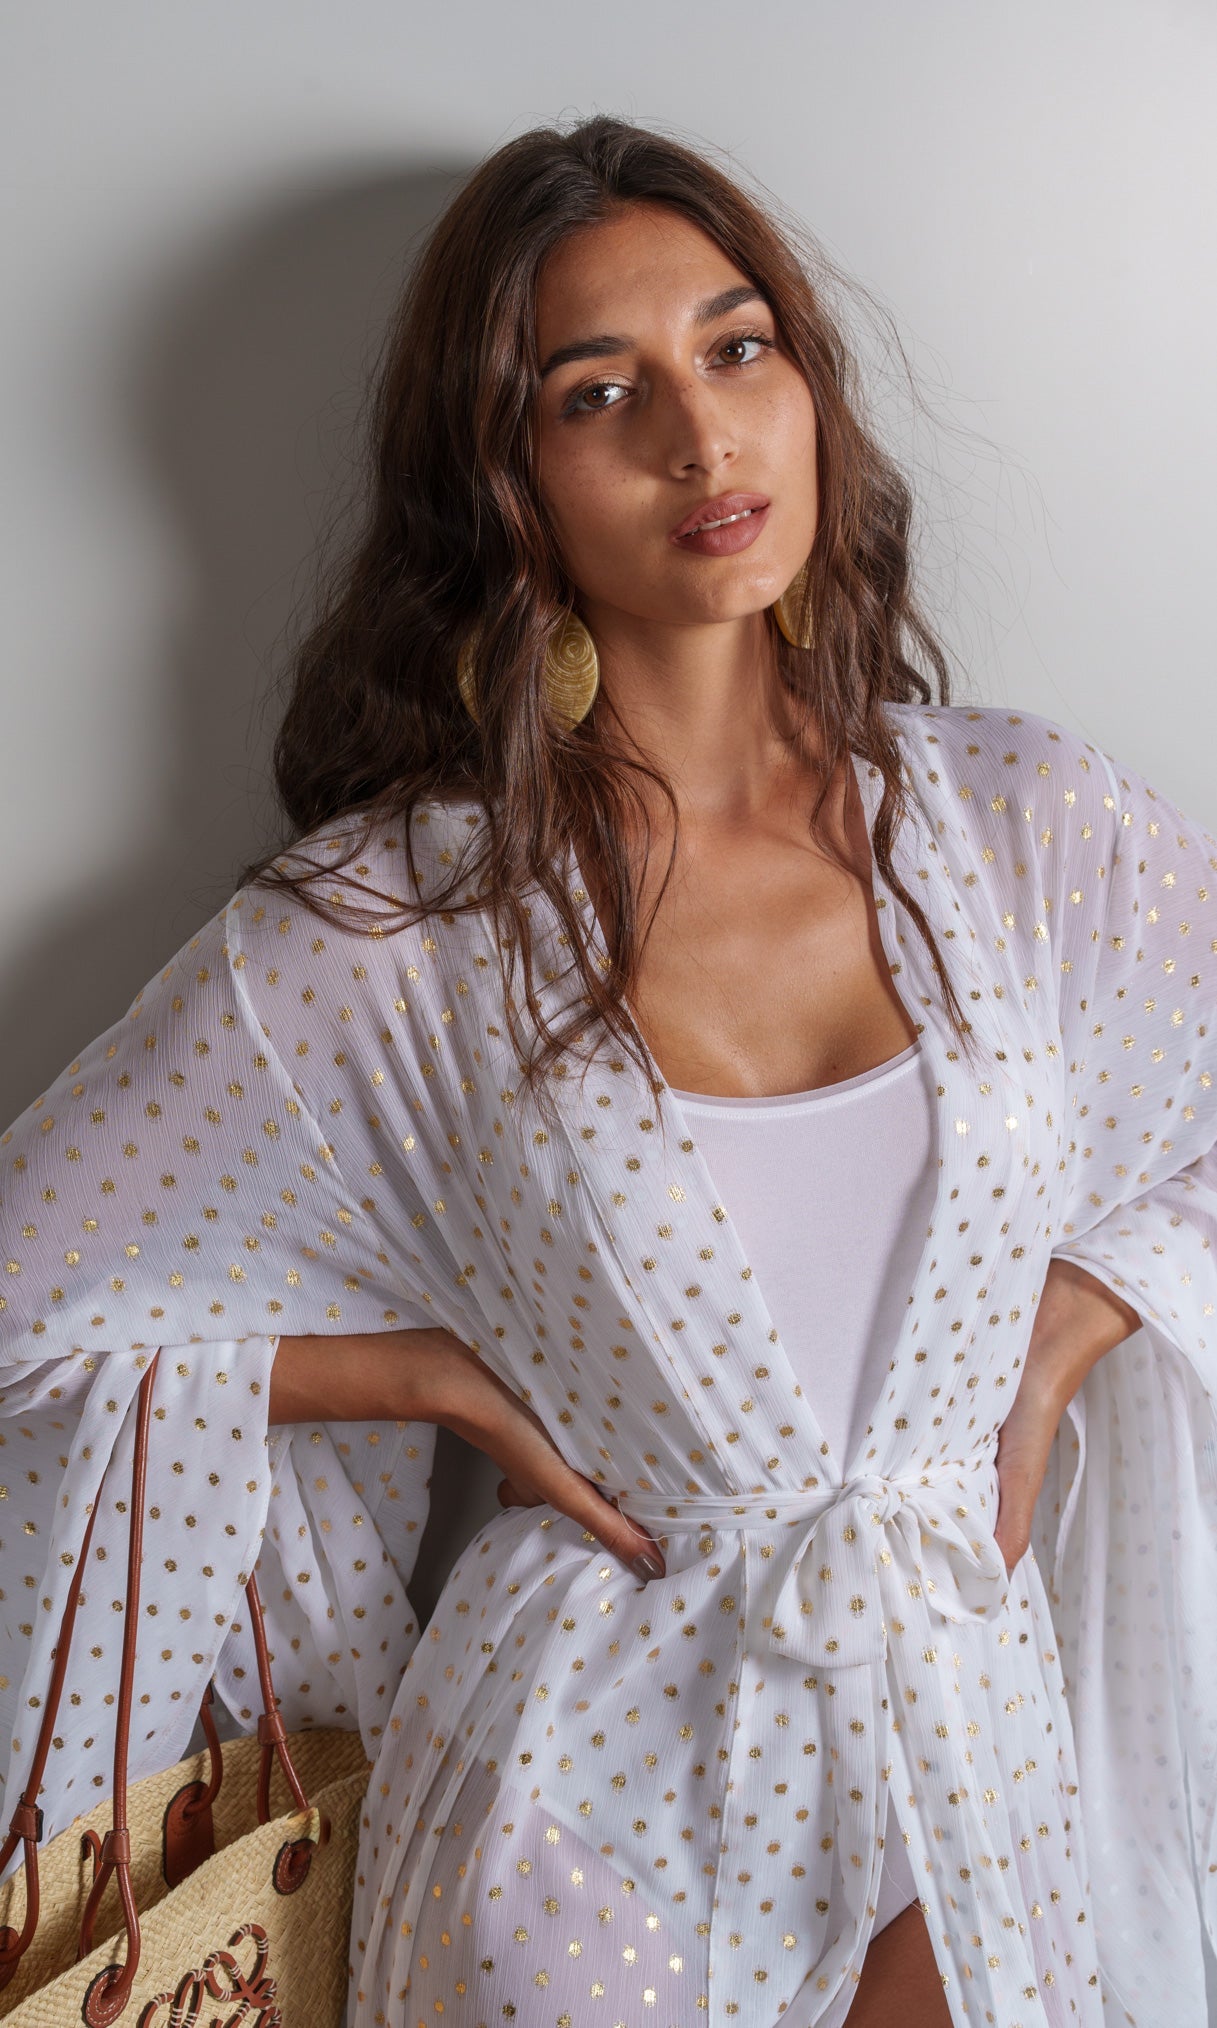 Model wears opulent white kimono crafted from a luxurious chiffon fabric with gold polka dot detailing